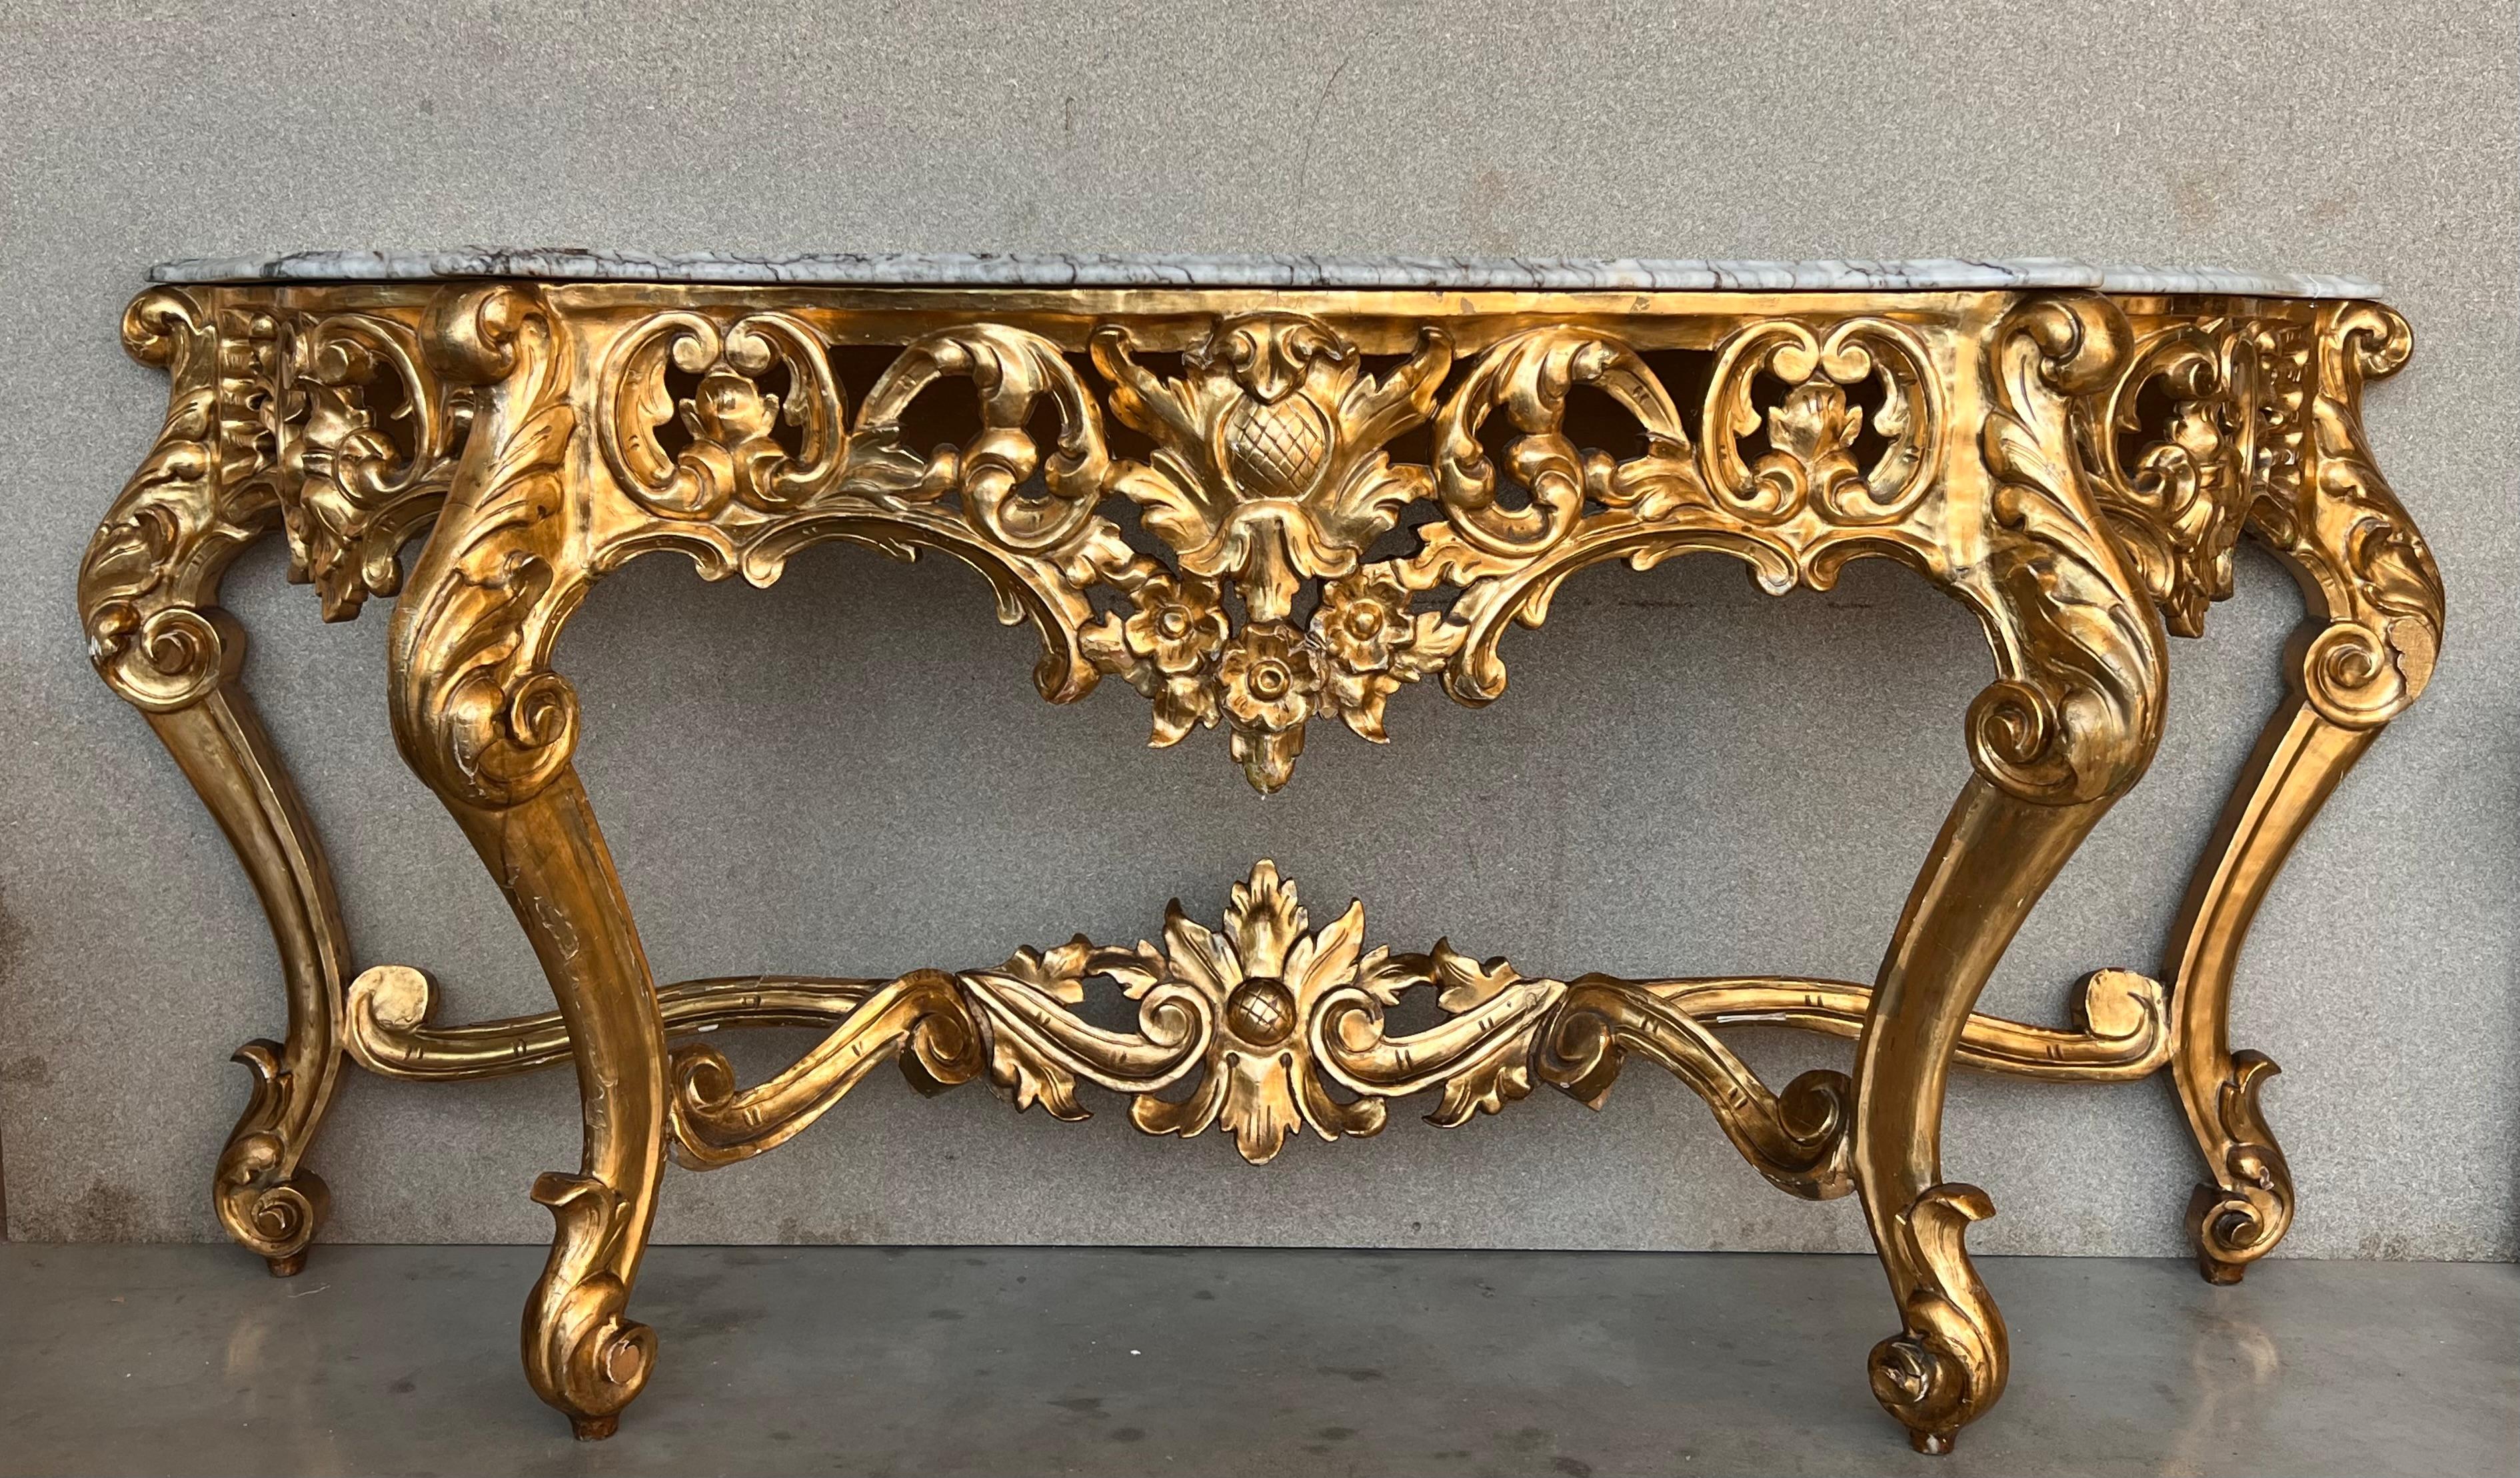 A magnificent and large scale Spanish 20th century Baroque style, ormolu and white marble freestanding console. The most impressive console is raised by elegant scrolled acanthus leaf feet below the powerful scrolled legs with richly carved flowers